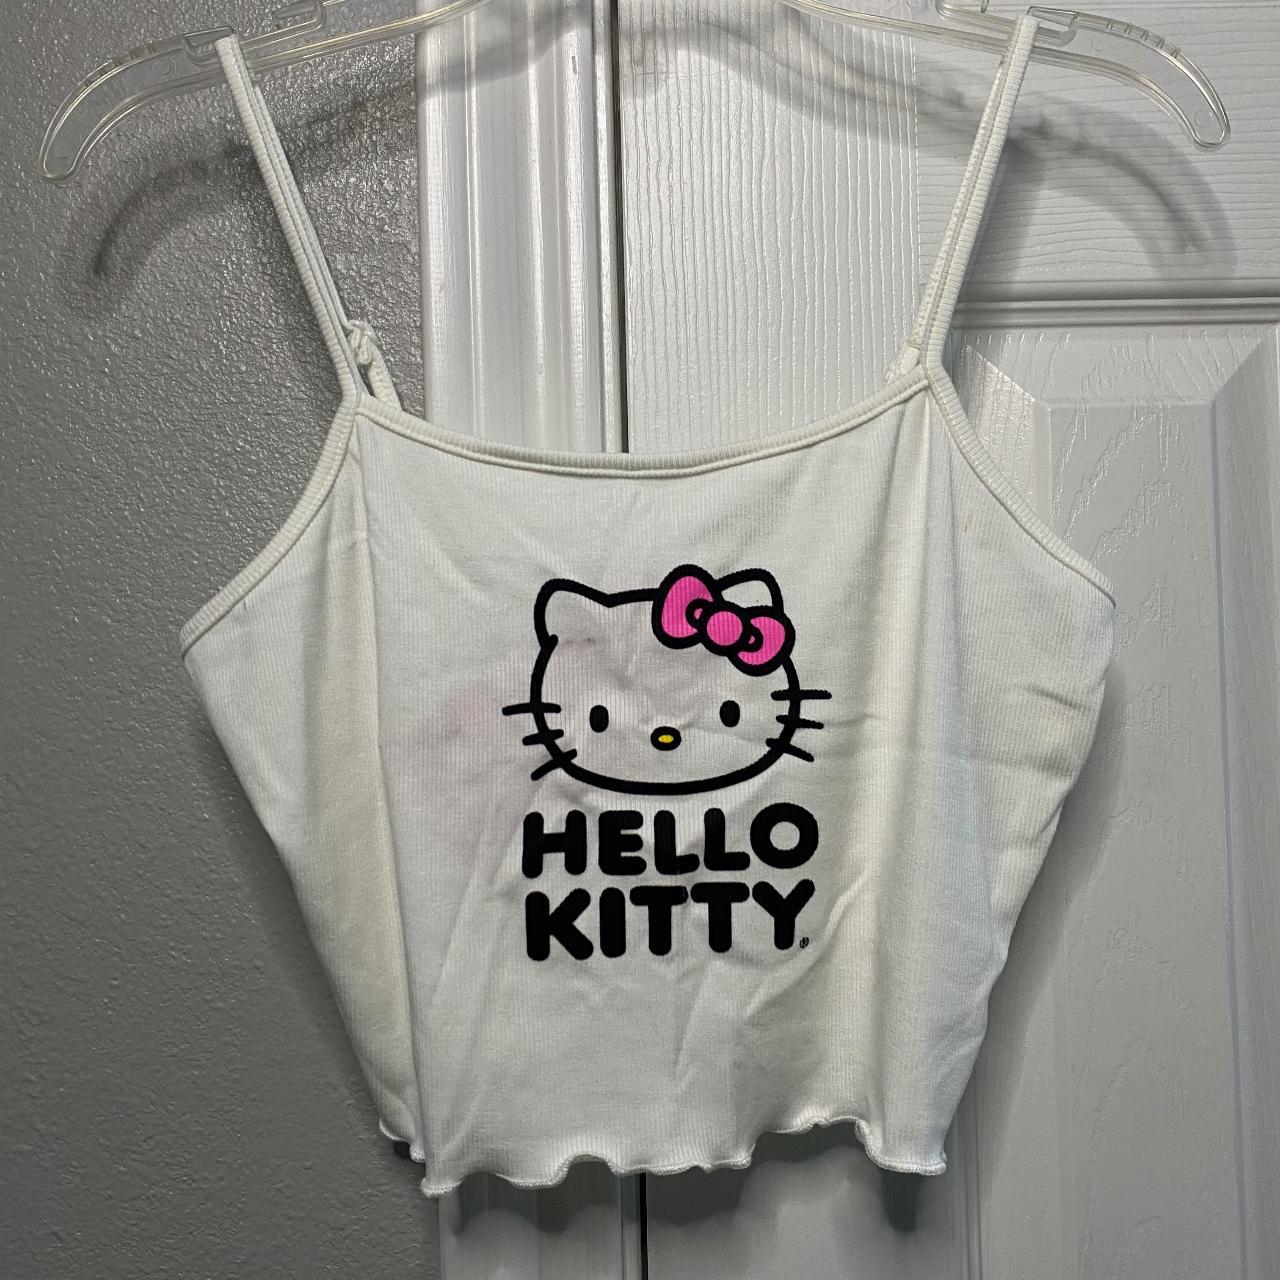 SHEIN X Hello Kitty and Friends Allover Cat Print Crop Tee  Crop top  outfits, Barbie dress fashion, Hello kitty clothes